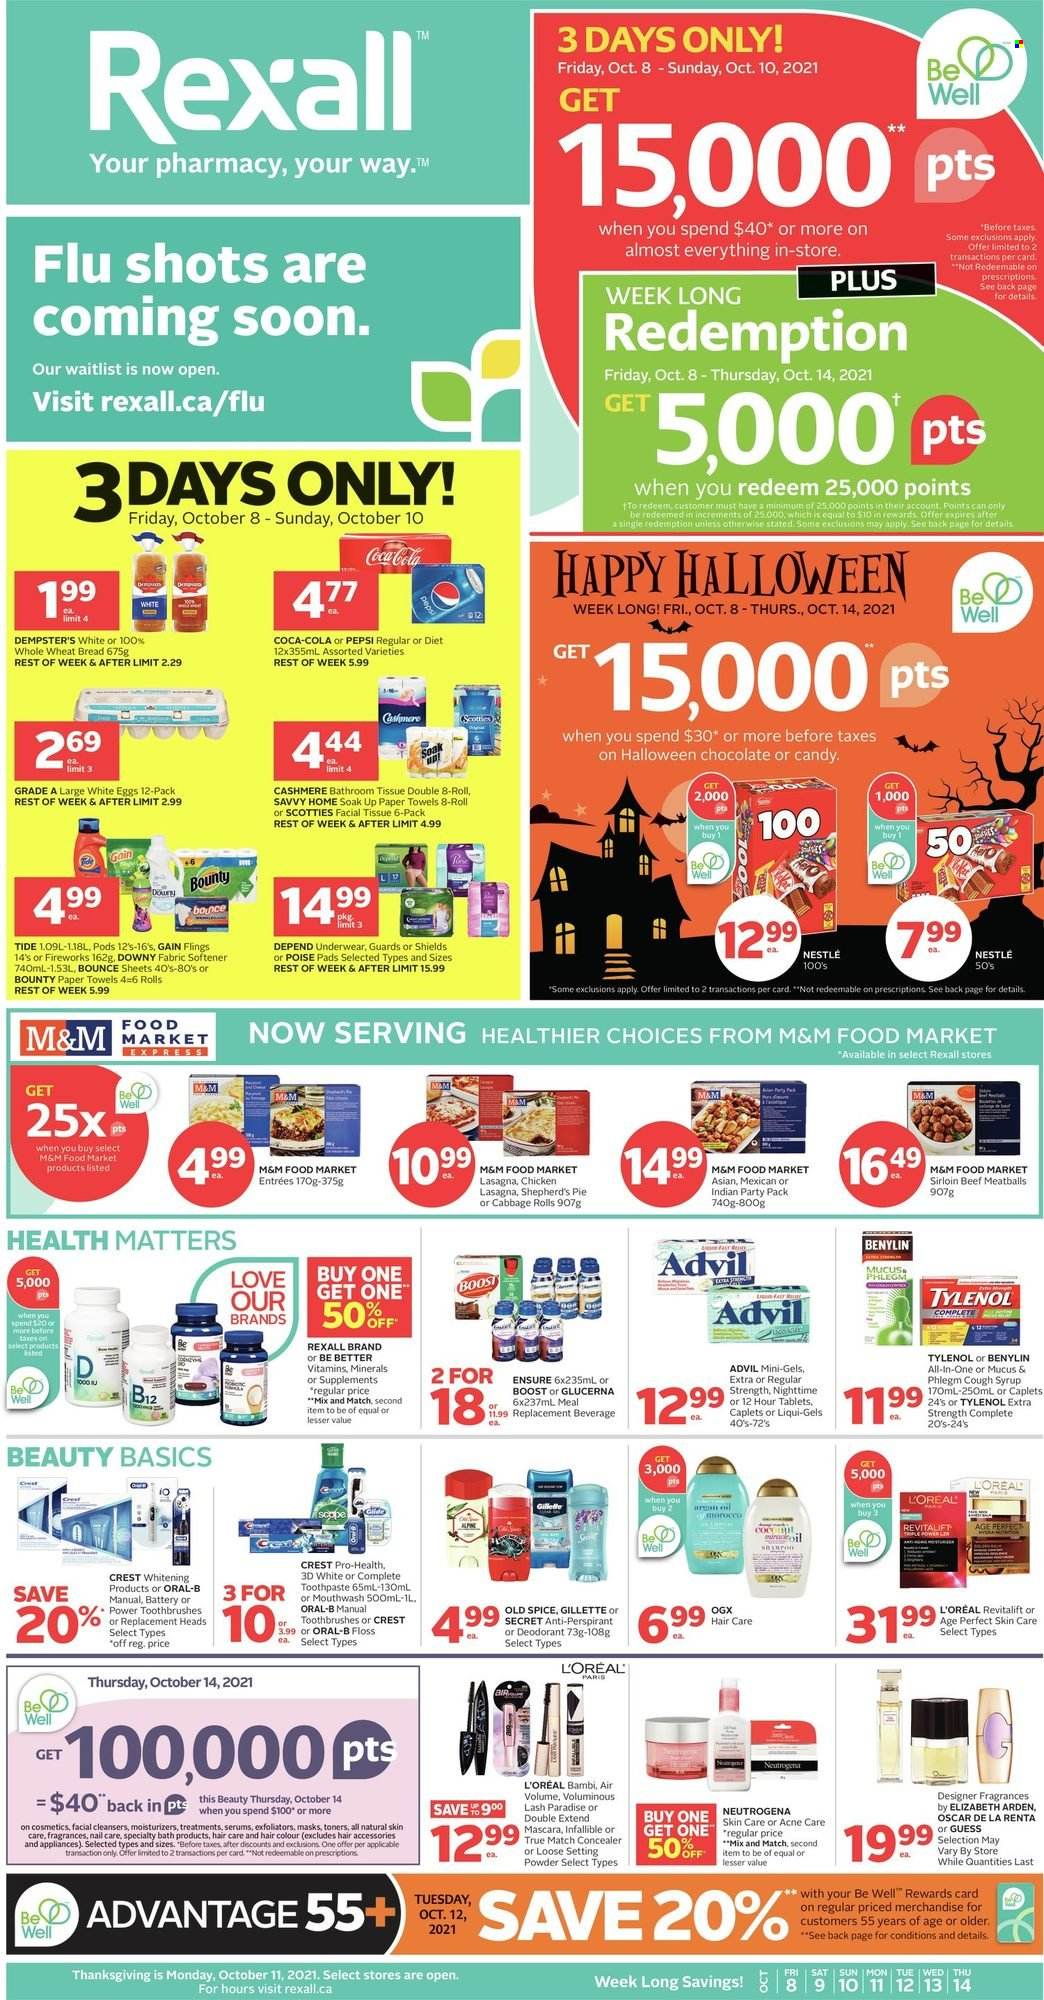 thumbnail - Rexall Flyer - October 08, 2021 - October 14, 2021 - Sales products - chocolate, Bounty, cabbage, spice, syrup, Coca-Cola, Pepsi, Boost, bath tissue, kitchen towels, paper towels, Gain, Tide, fabric softener, Bounce, Downy Laundry, toothpaste, mouthwash, Crest, L’Oréal, moisturizer, OGX, hair color, anti-perspirant, Guess, corrector, mascara, face powder, Tylenol, Glucerna, Advil Rapid, Benylin, Nestlé, Elizabeth Arden, Gillette, Neutrogena, Old Spice, Oral-B, M&M's, deodorant. Page 1.